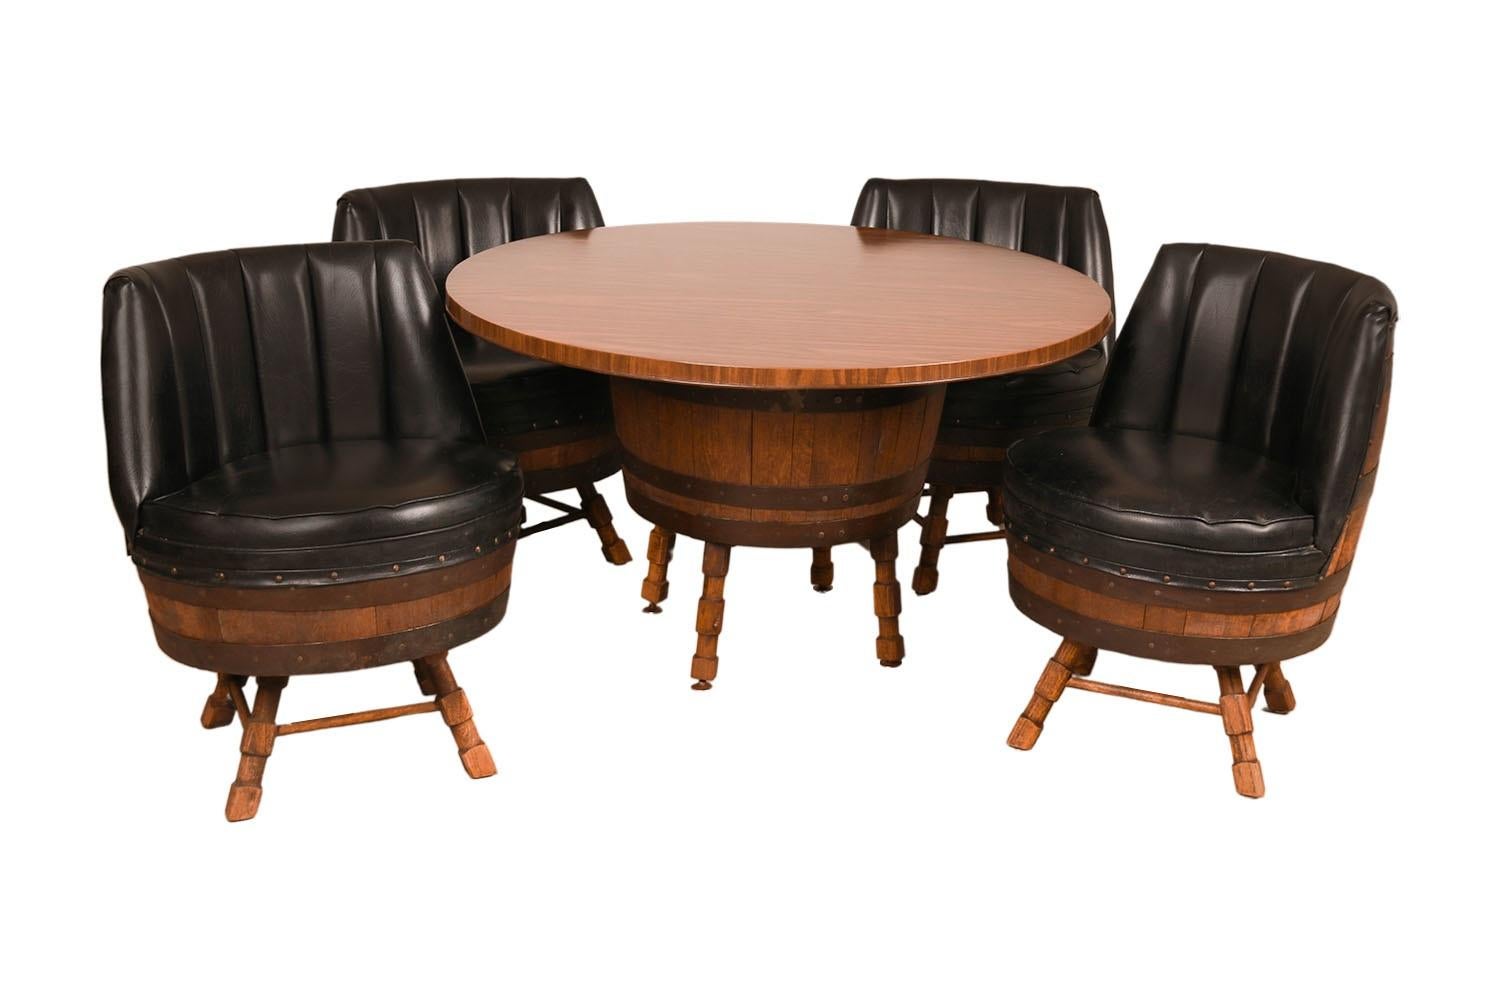 A stunning whiskey barrel table and chairs dining set.  Features a round tabletop resting on a barrel base with four stout legs creating an exceedingly sturdy base. Beautifully paired with four matching swivel chairs, each with black padded vinyl